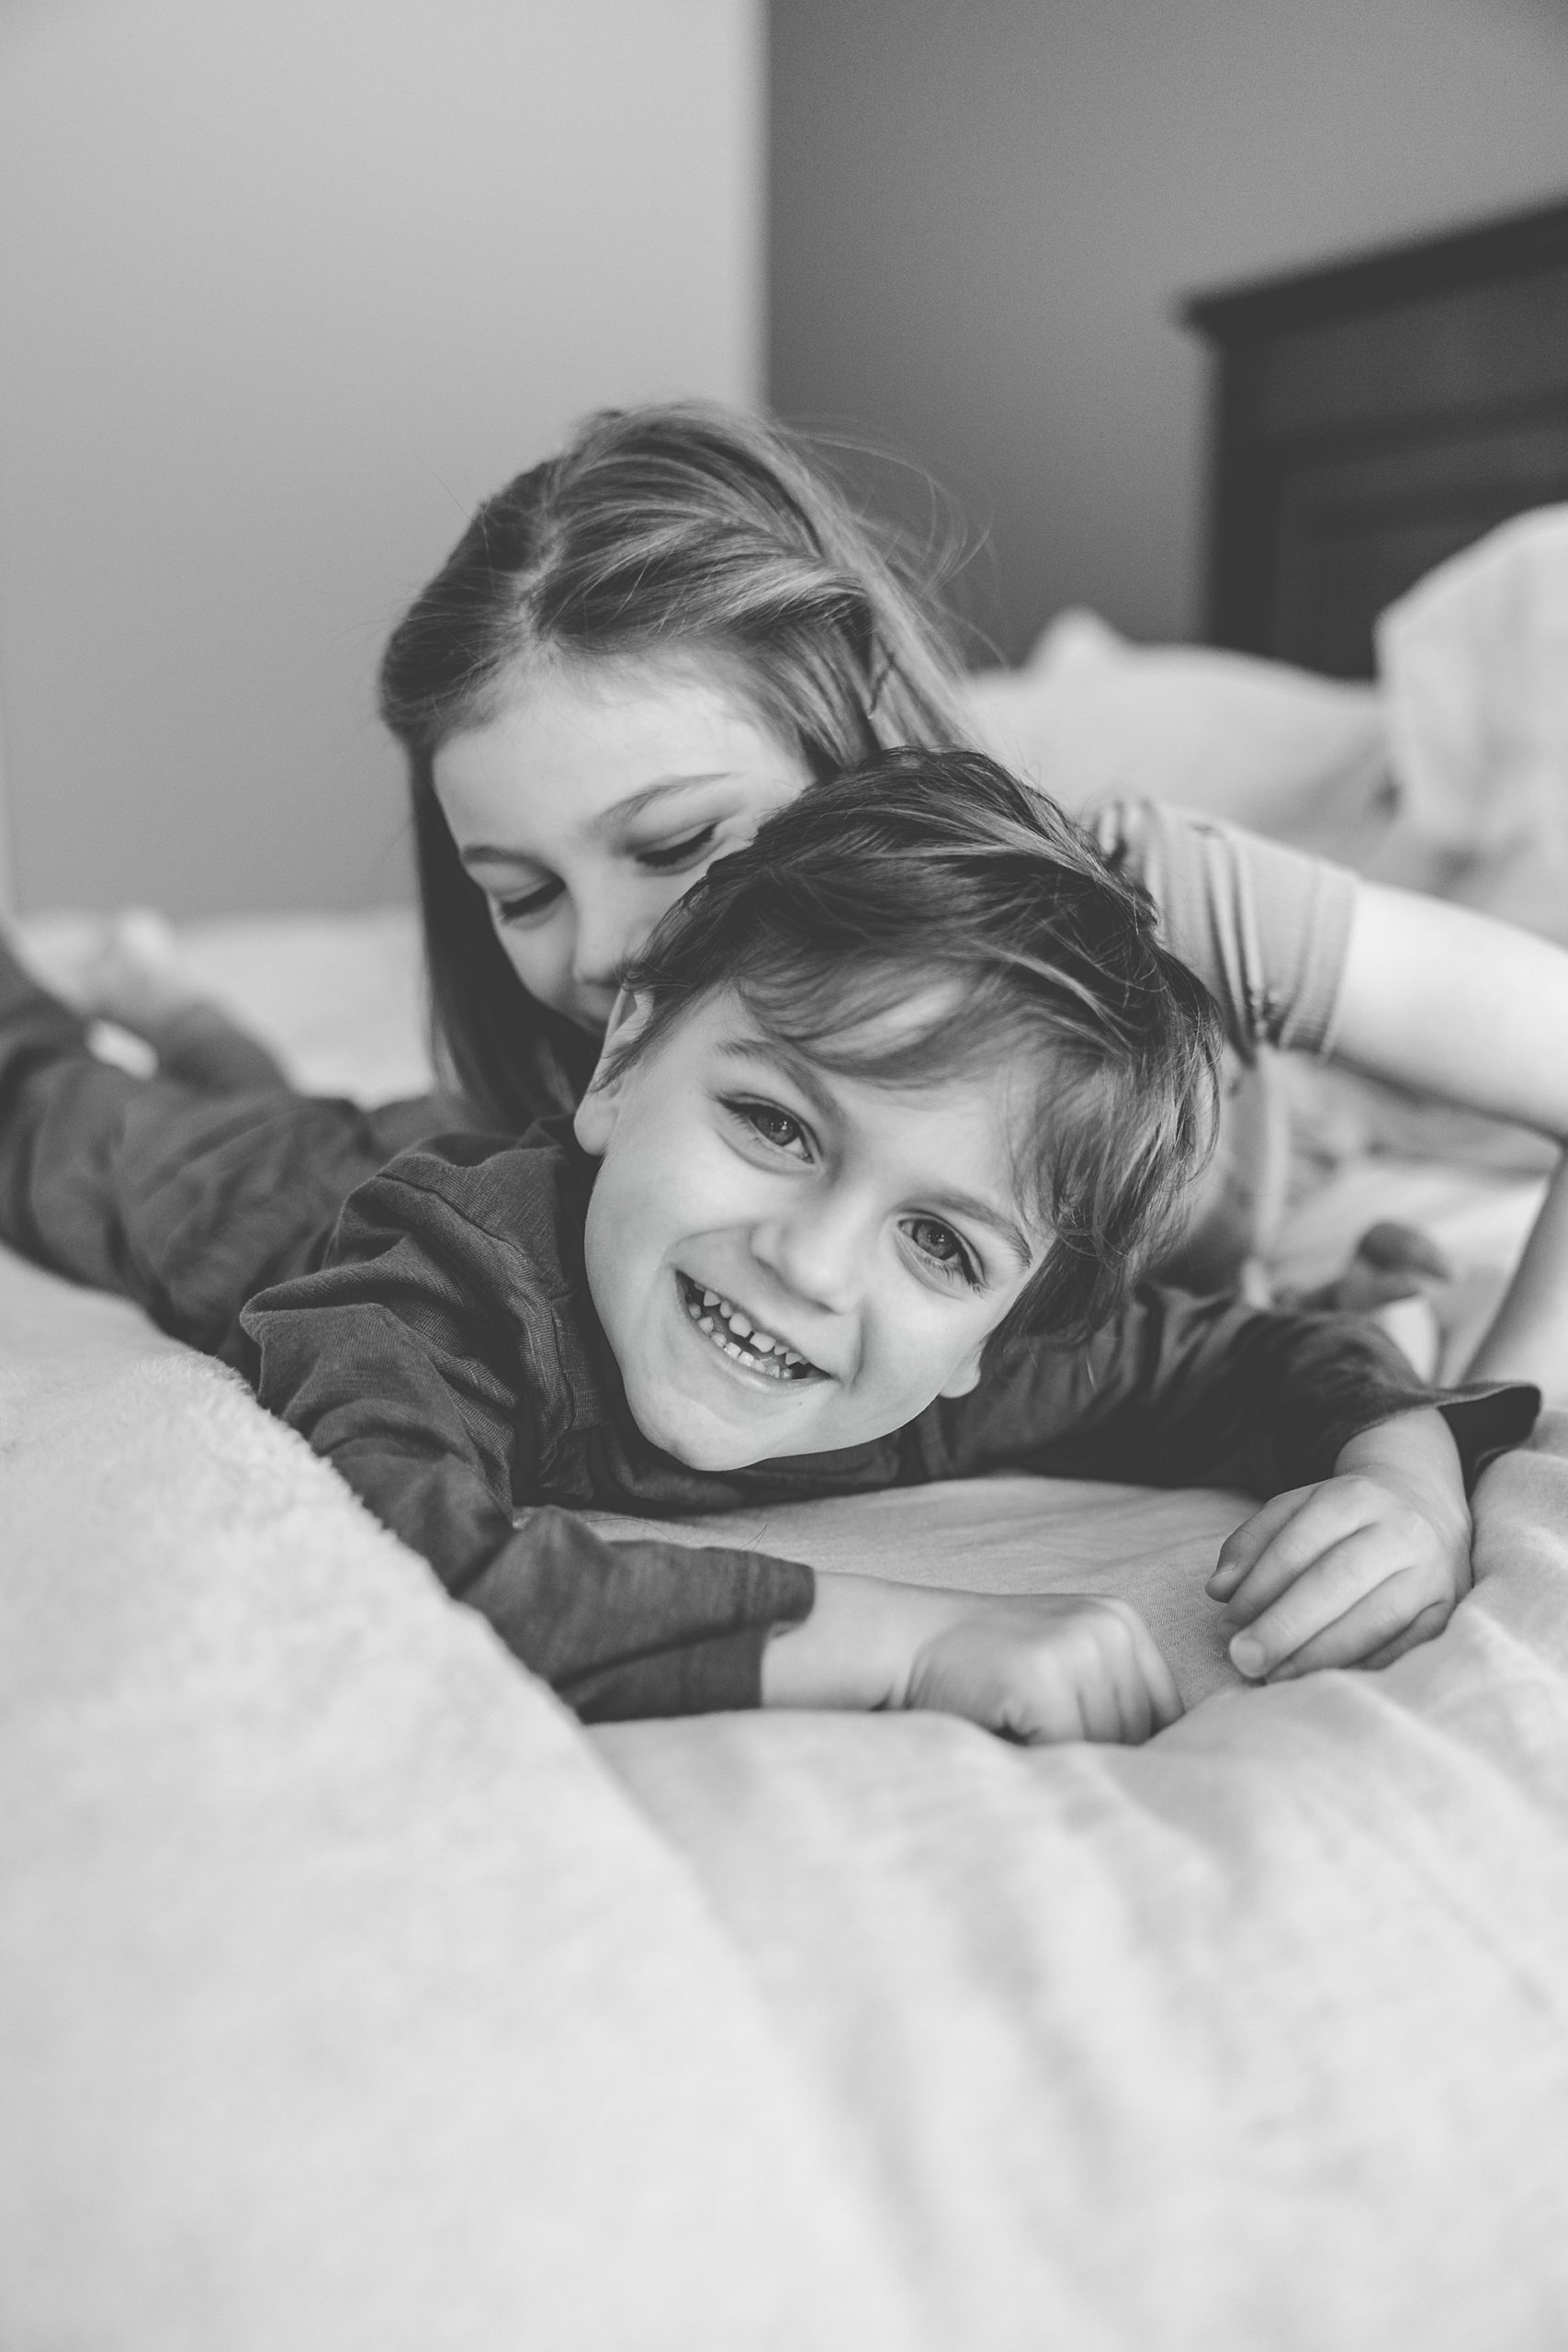 kids play together on bed during family photos at home